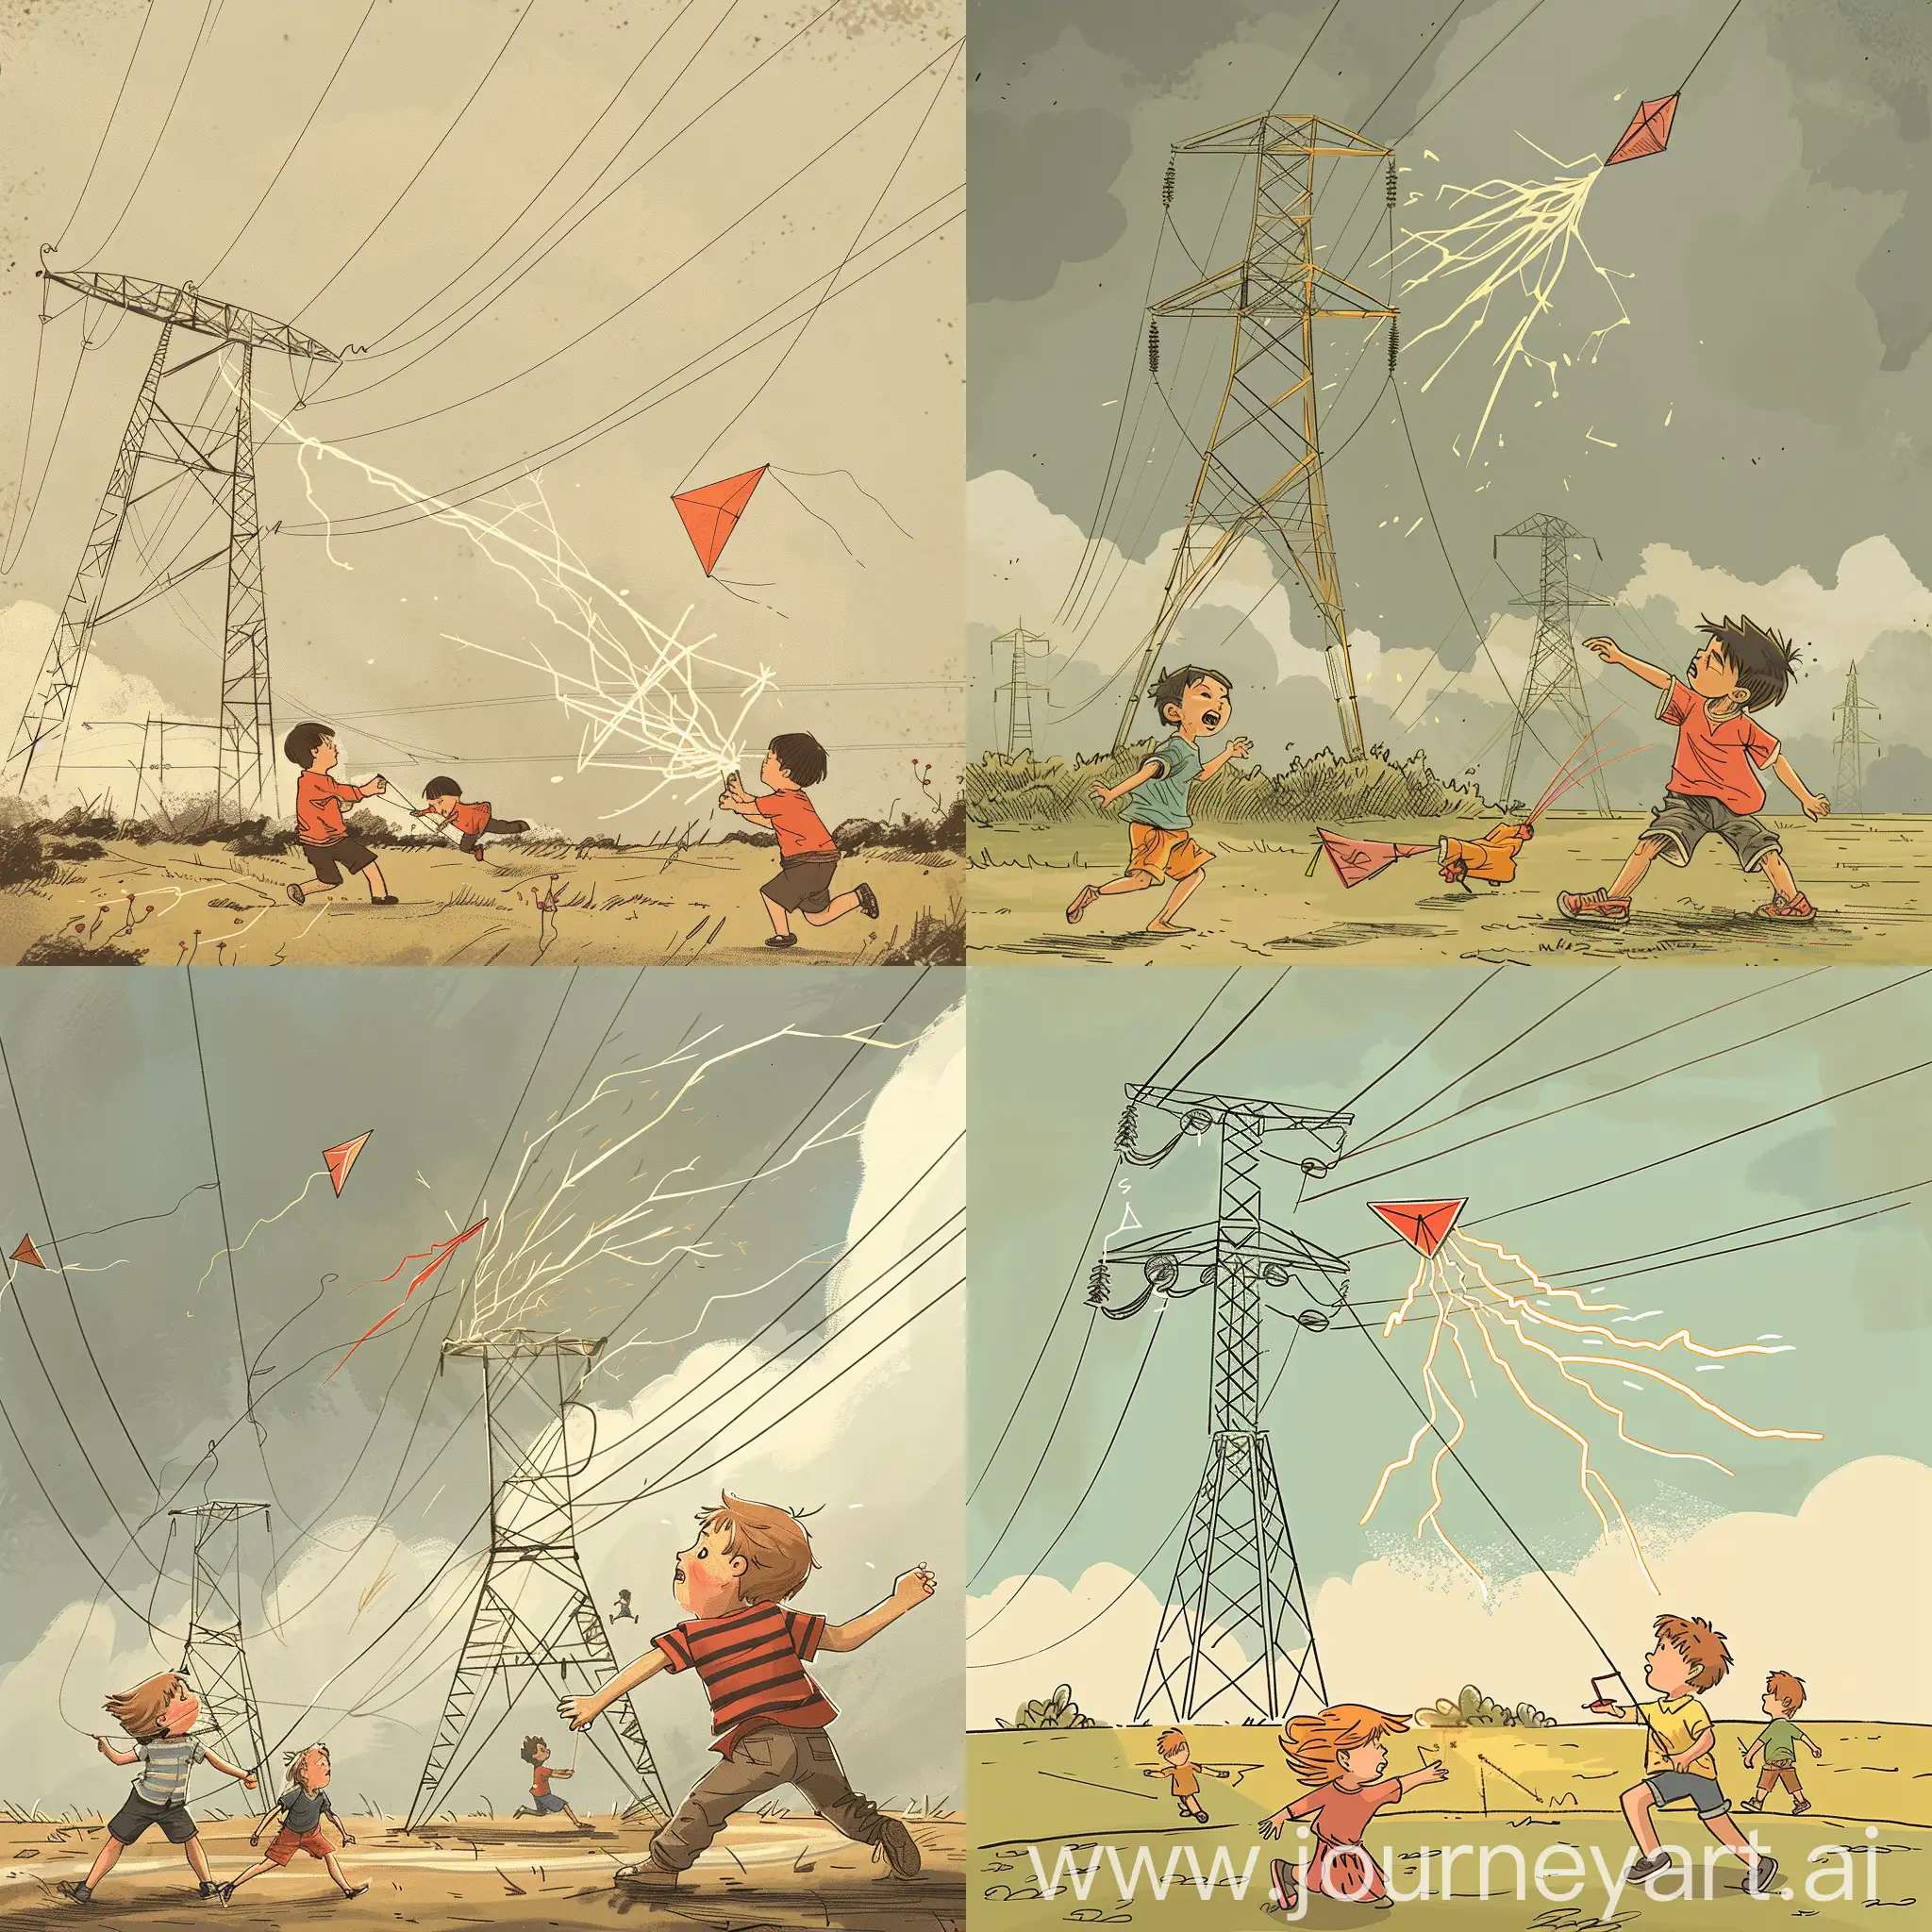 Children-Flying-Kites-near-Transmission-Line-Pylons-with-Electric-Sparks